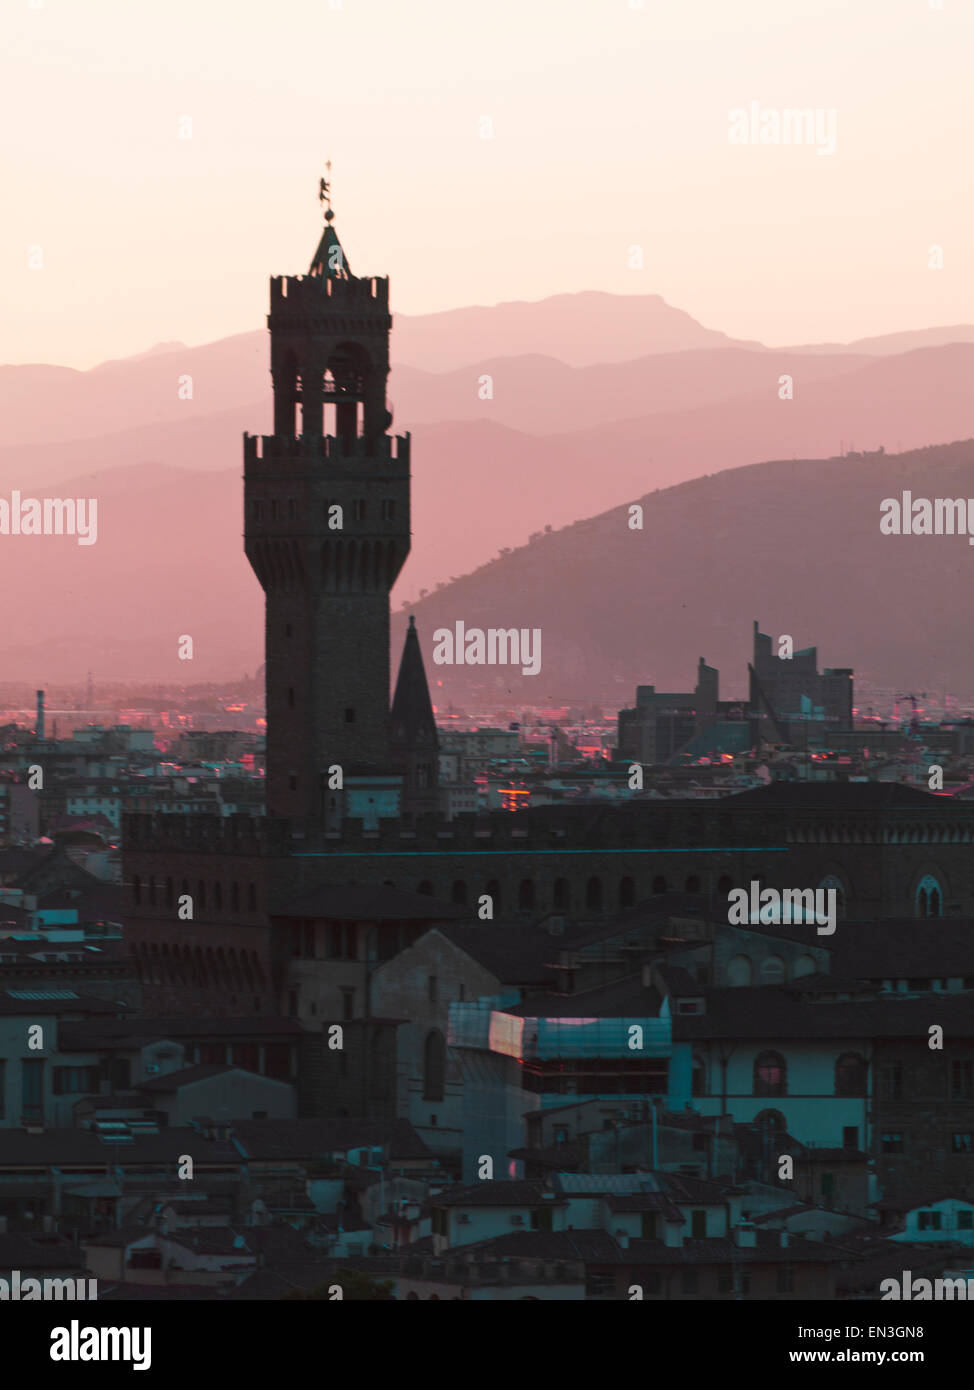 Italy, Florence, Towers in city at dusk Stock Photo